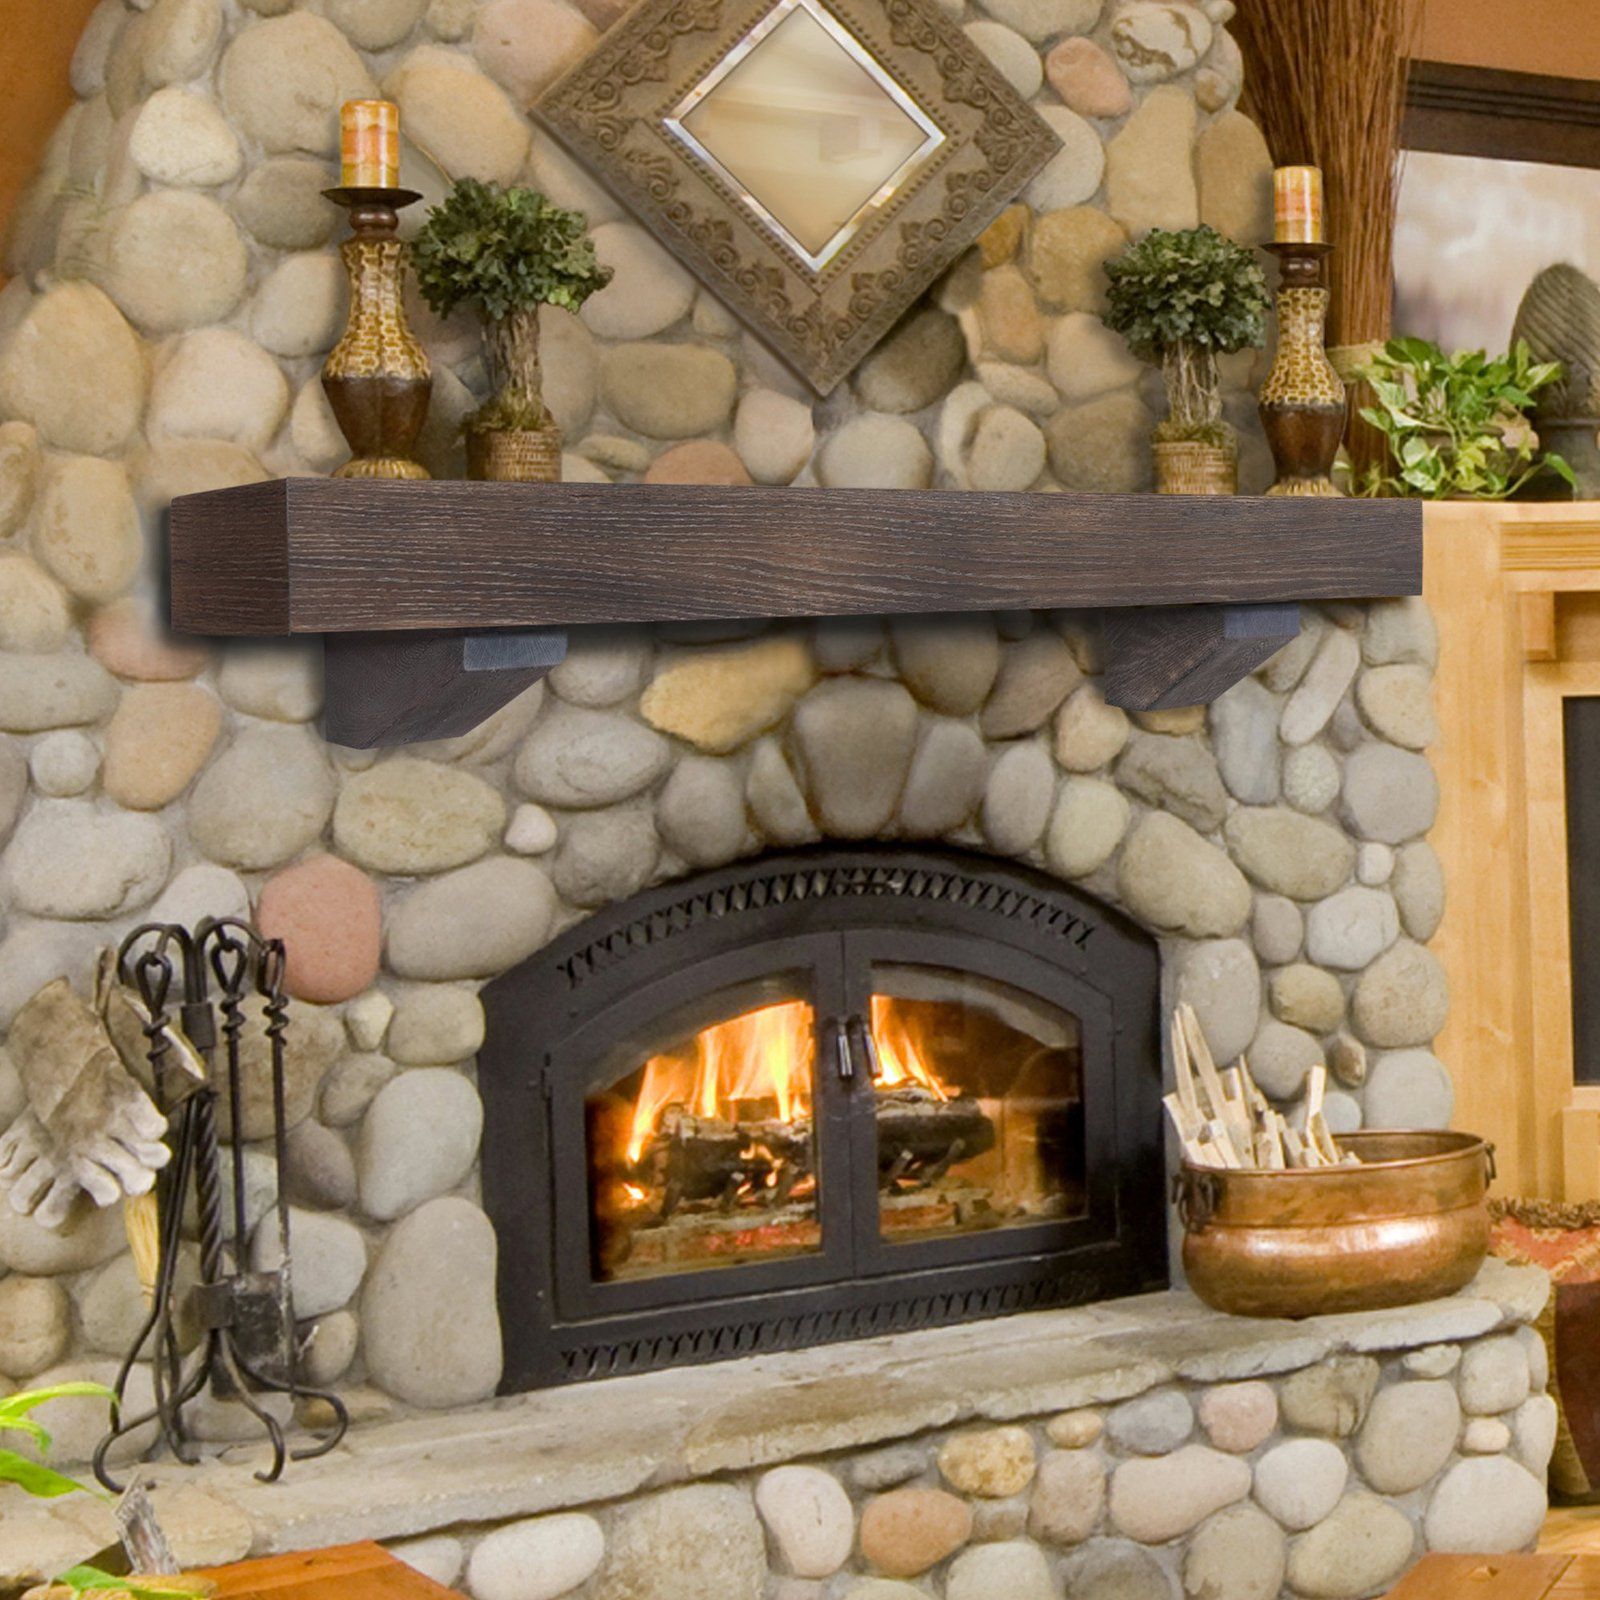 Oak Fireplace Mantel Beautiful Have to Have It Donny Osmond Home Heritage Series Reclaimed